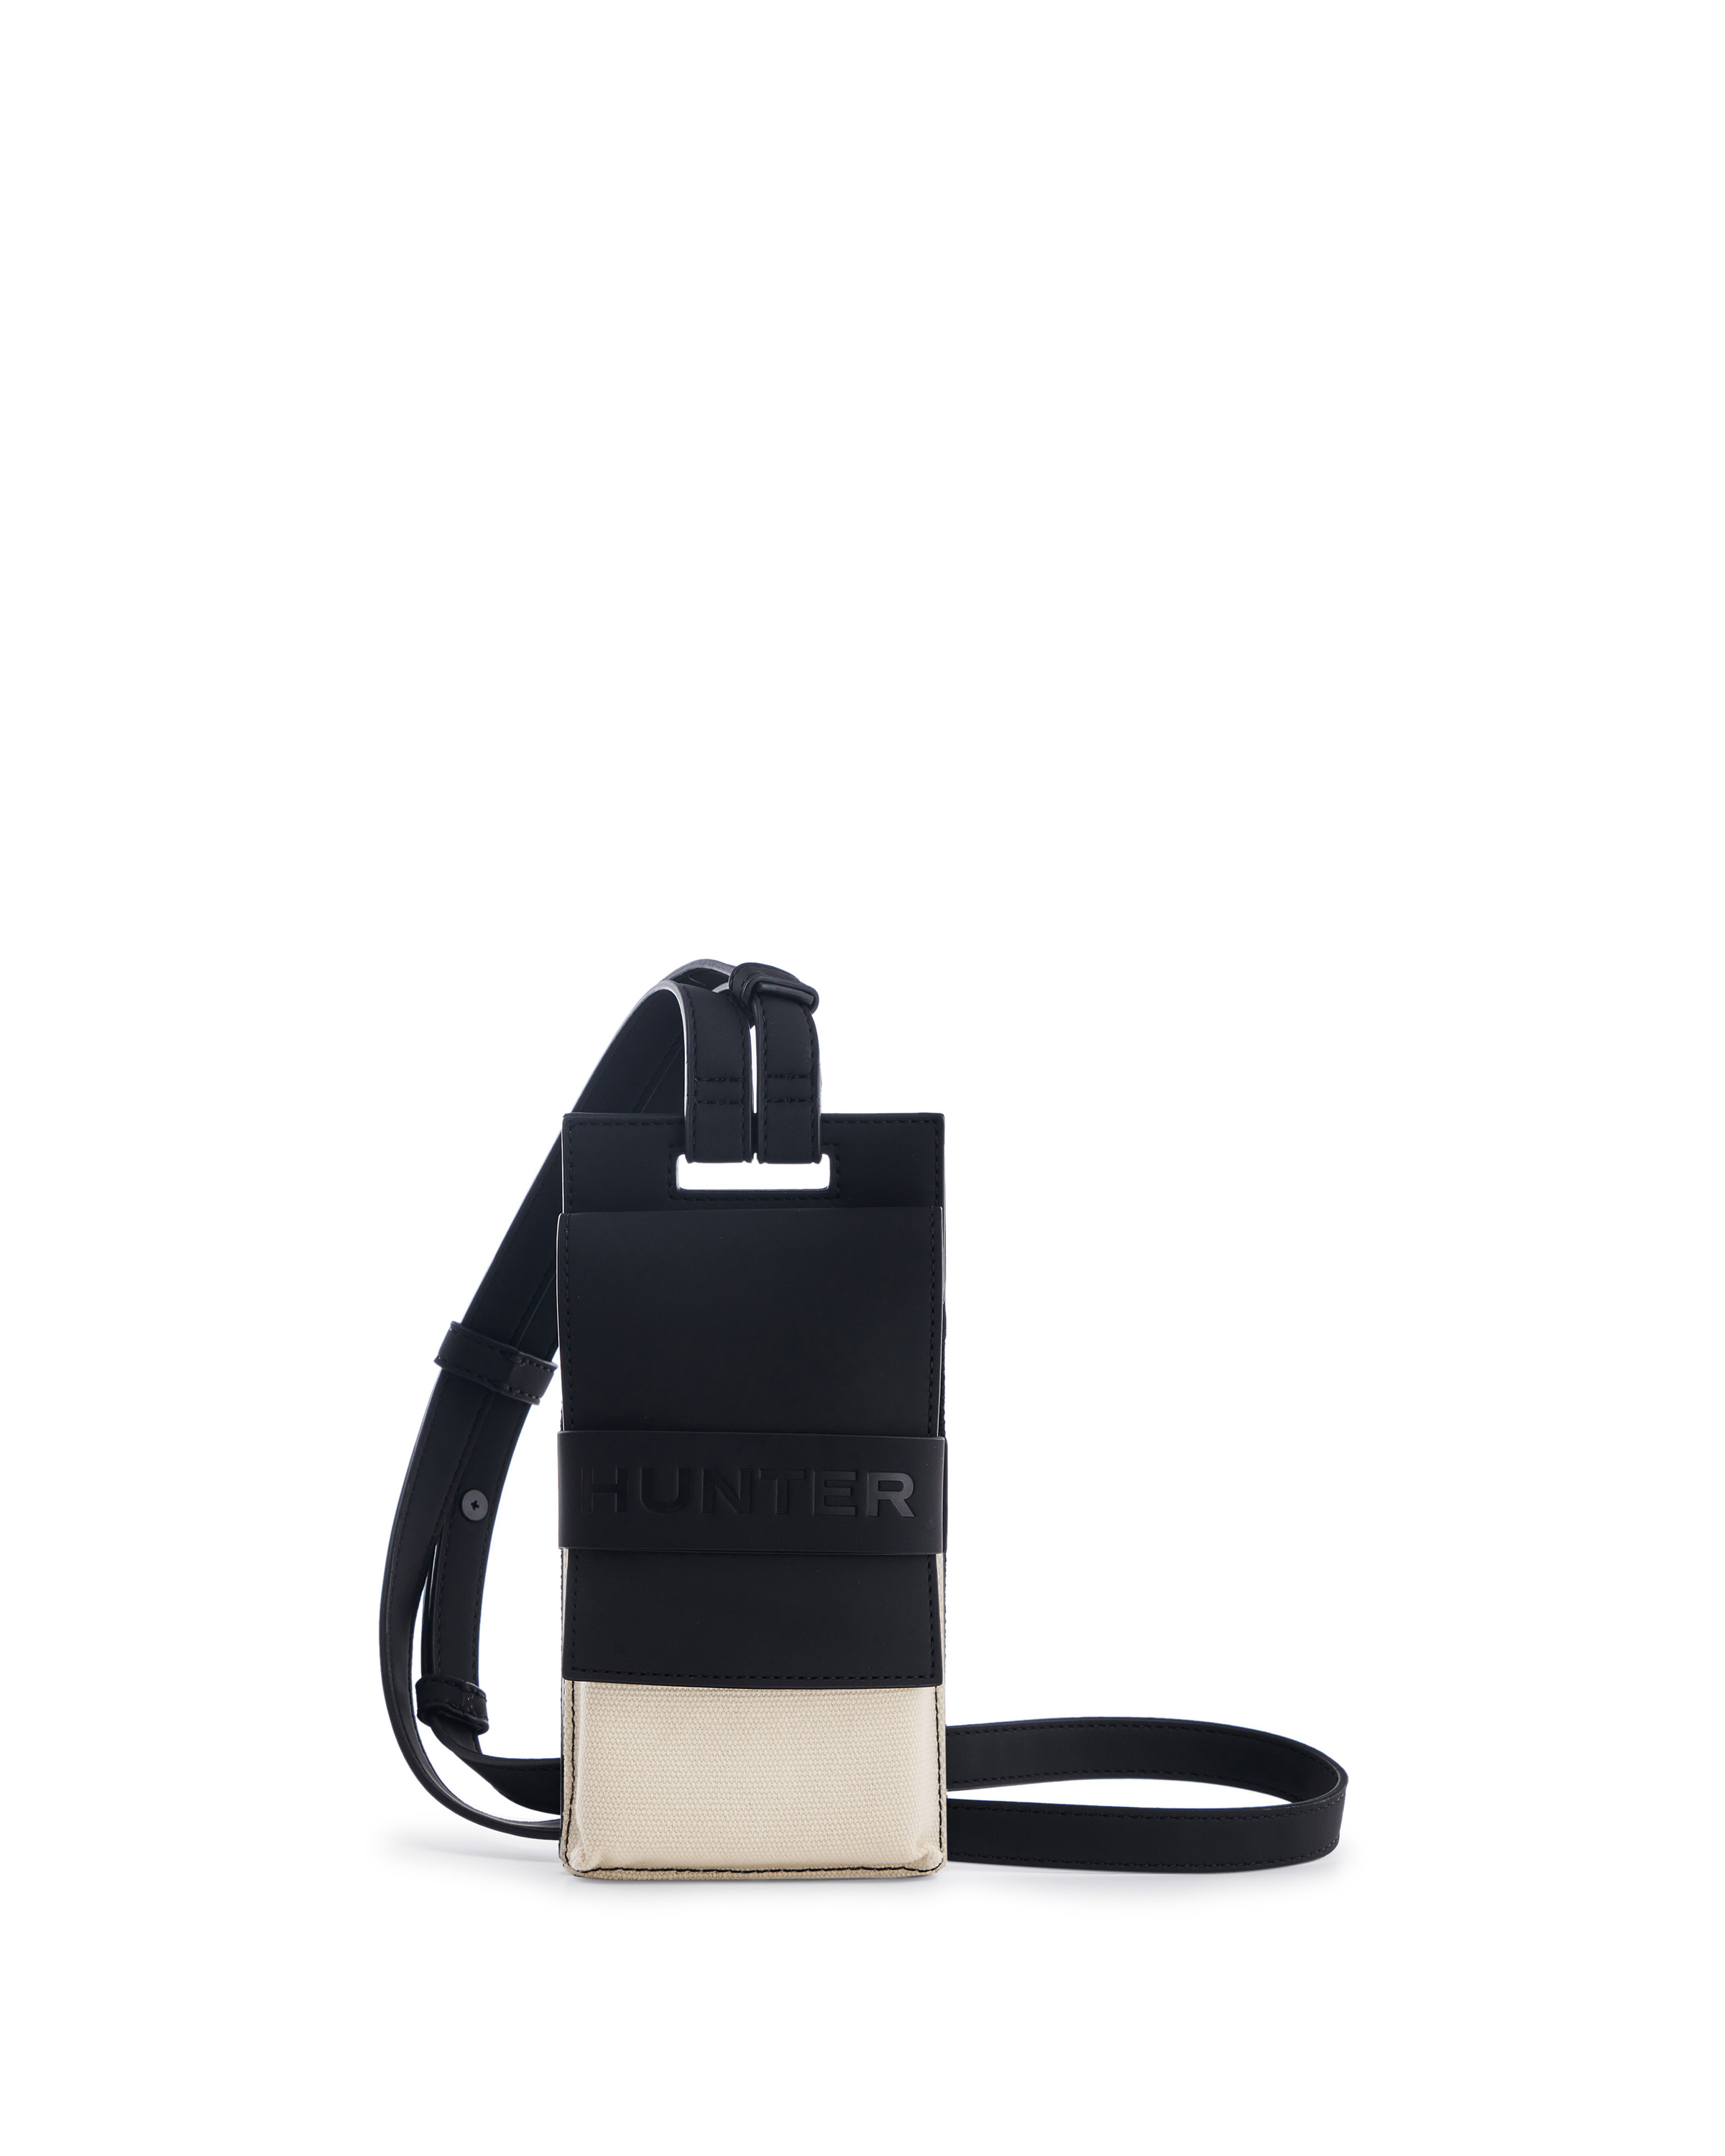 REFINED STITCH CANVAS PHONE POUCH